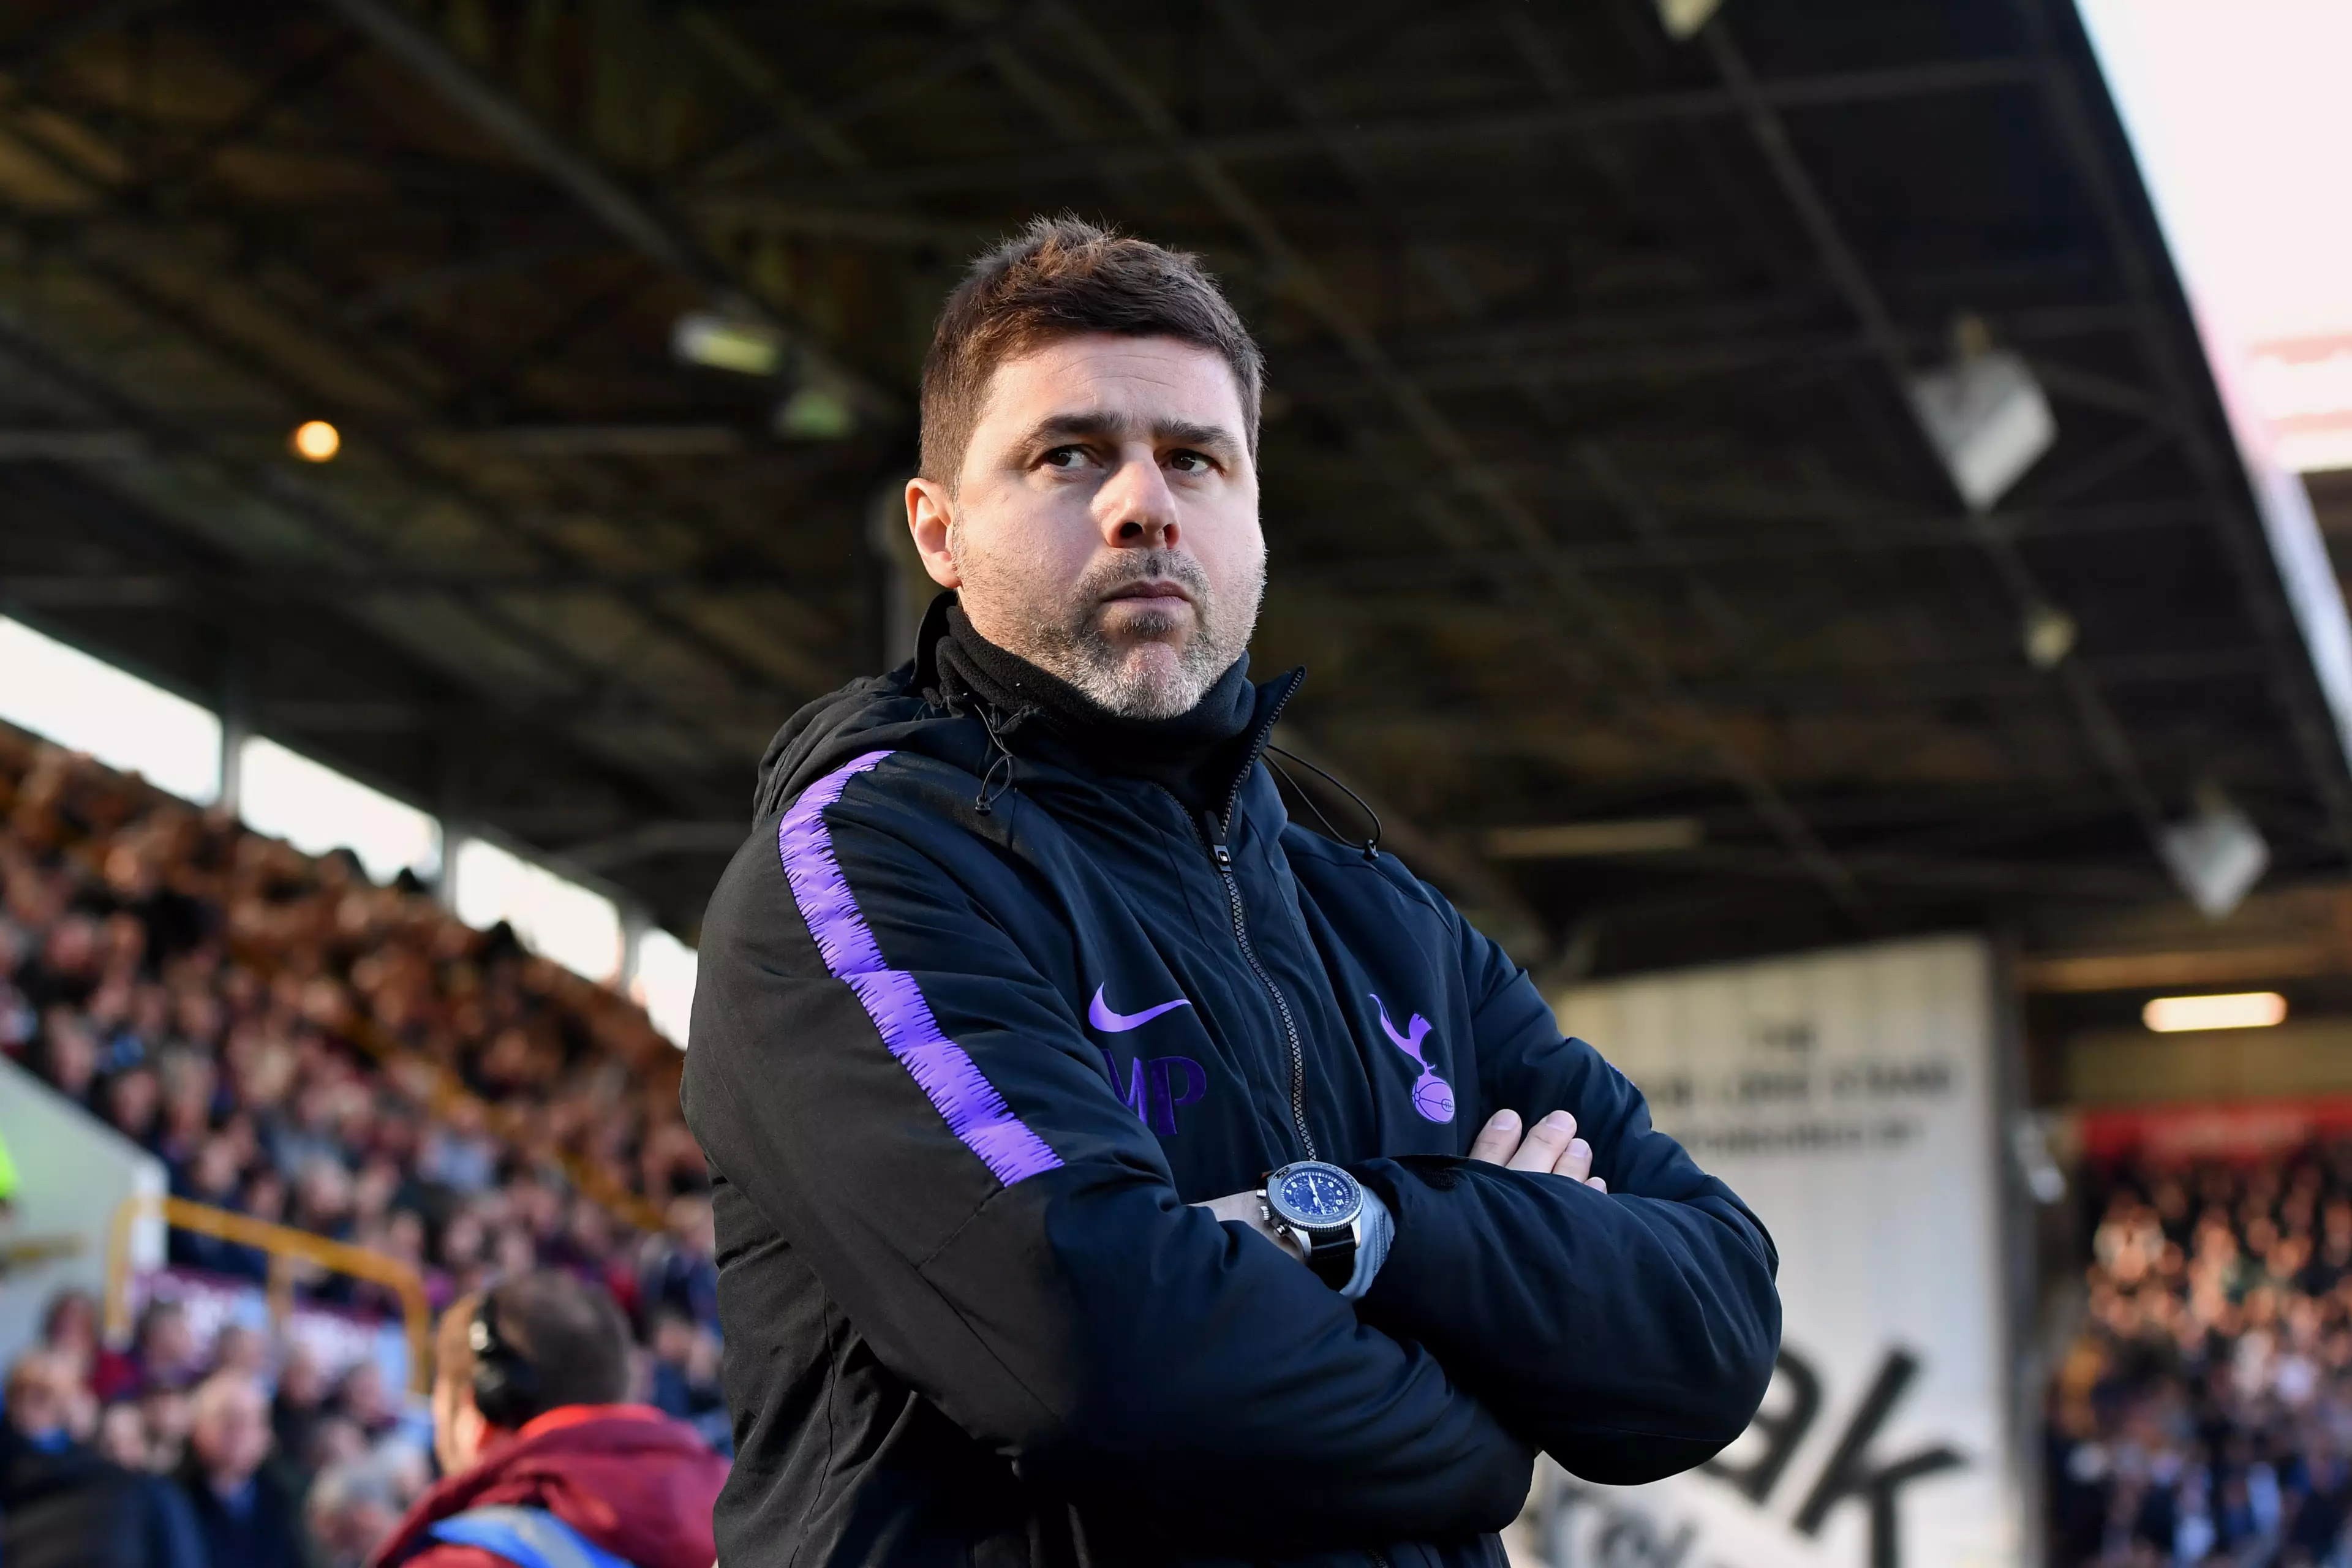 Pochettino was clearly not happy with his team on Saturday. Image: PA Images